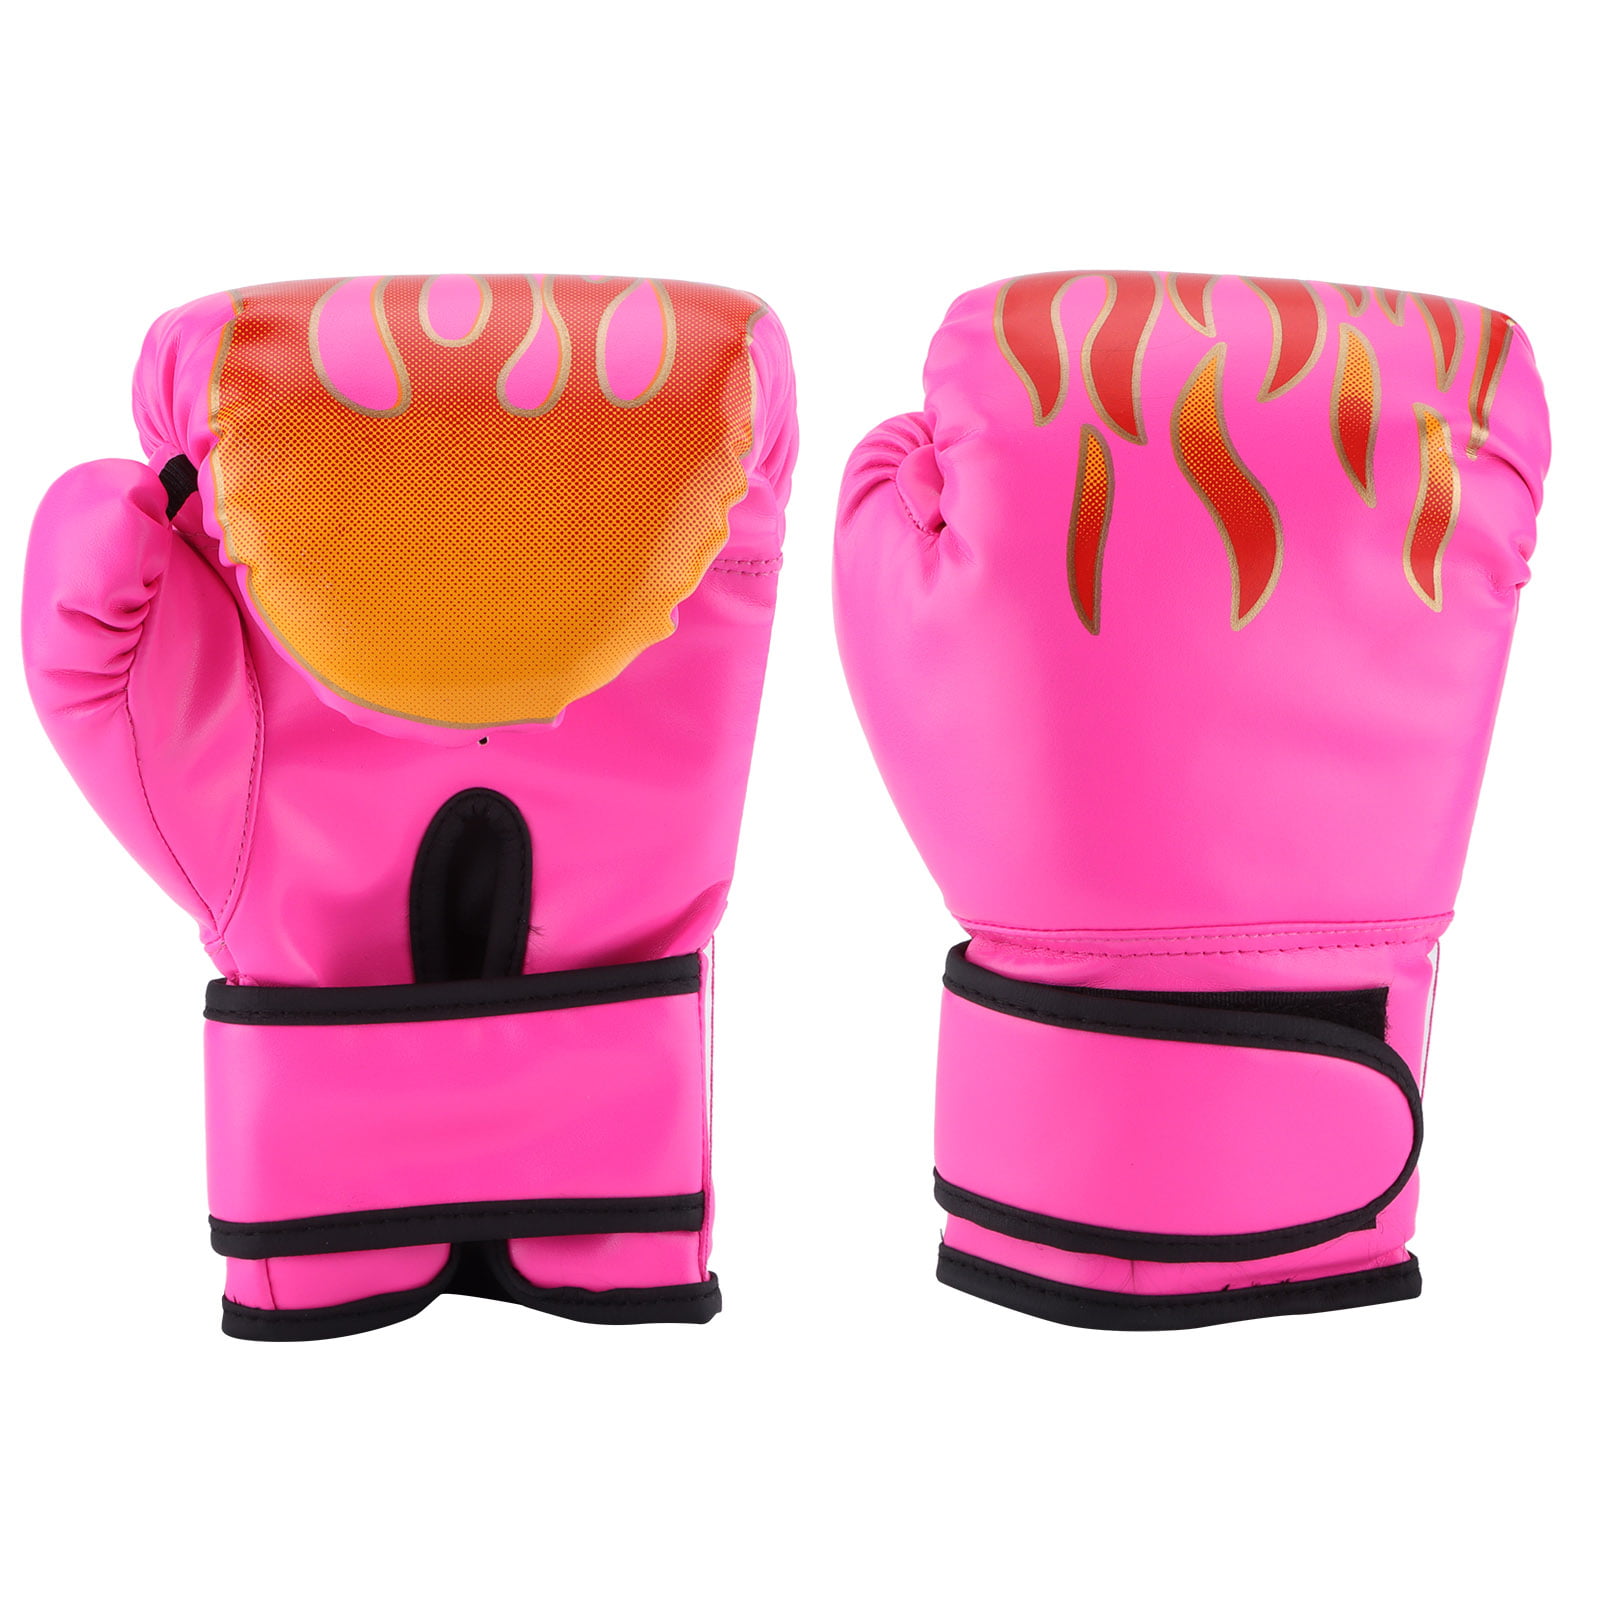 1 Pair Knuckle Guards Protector for Punching Boxing Sparring Training Pink 